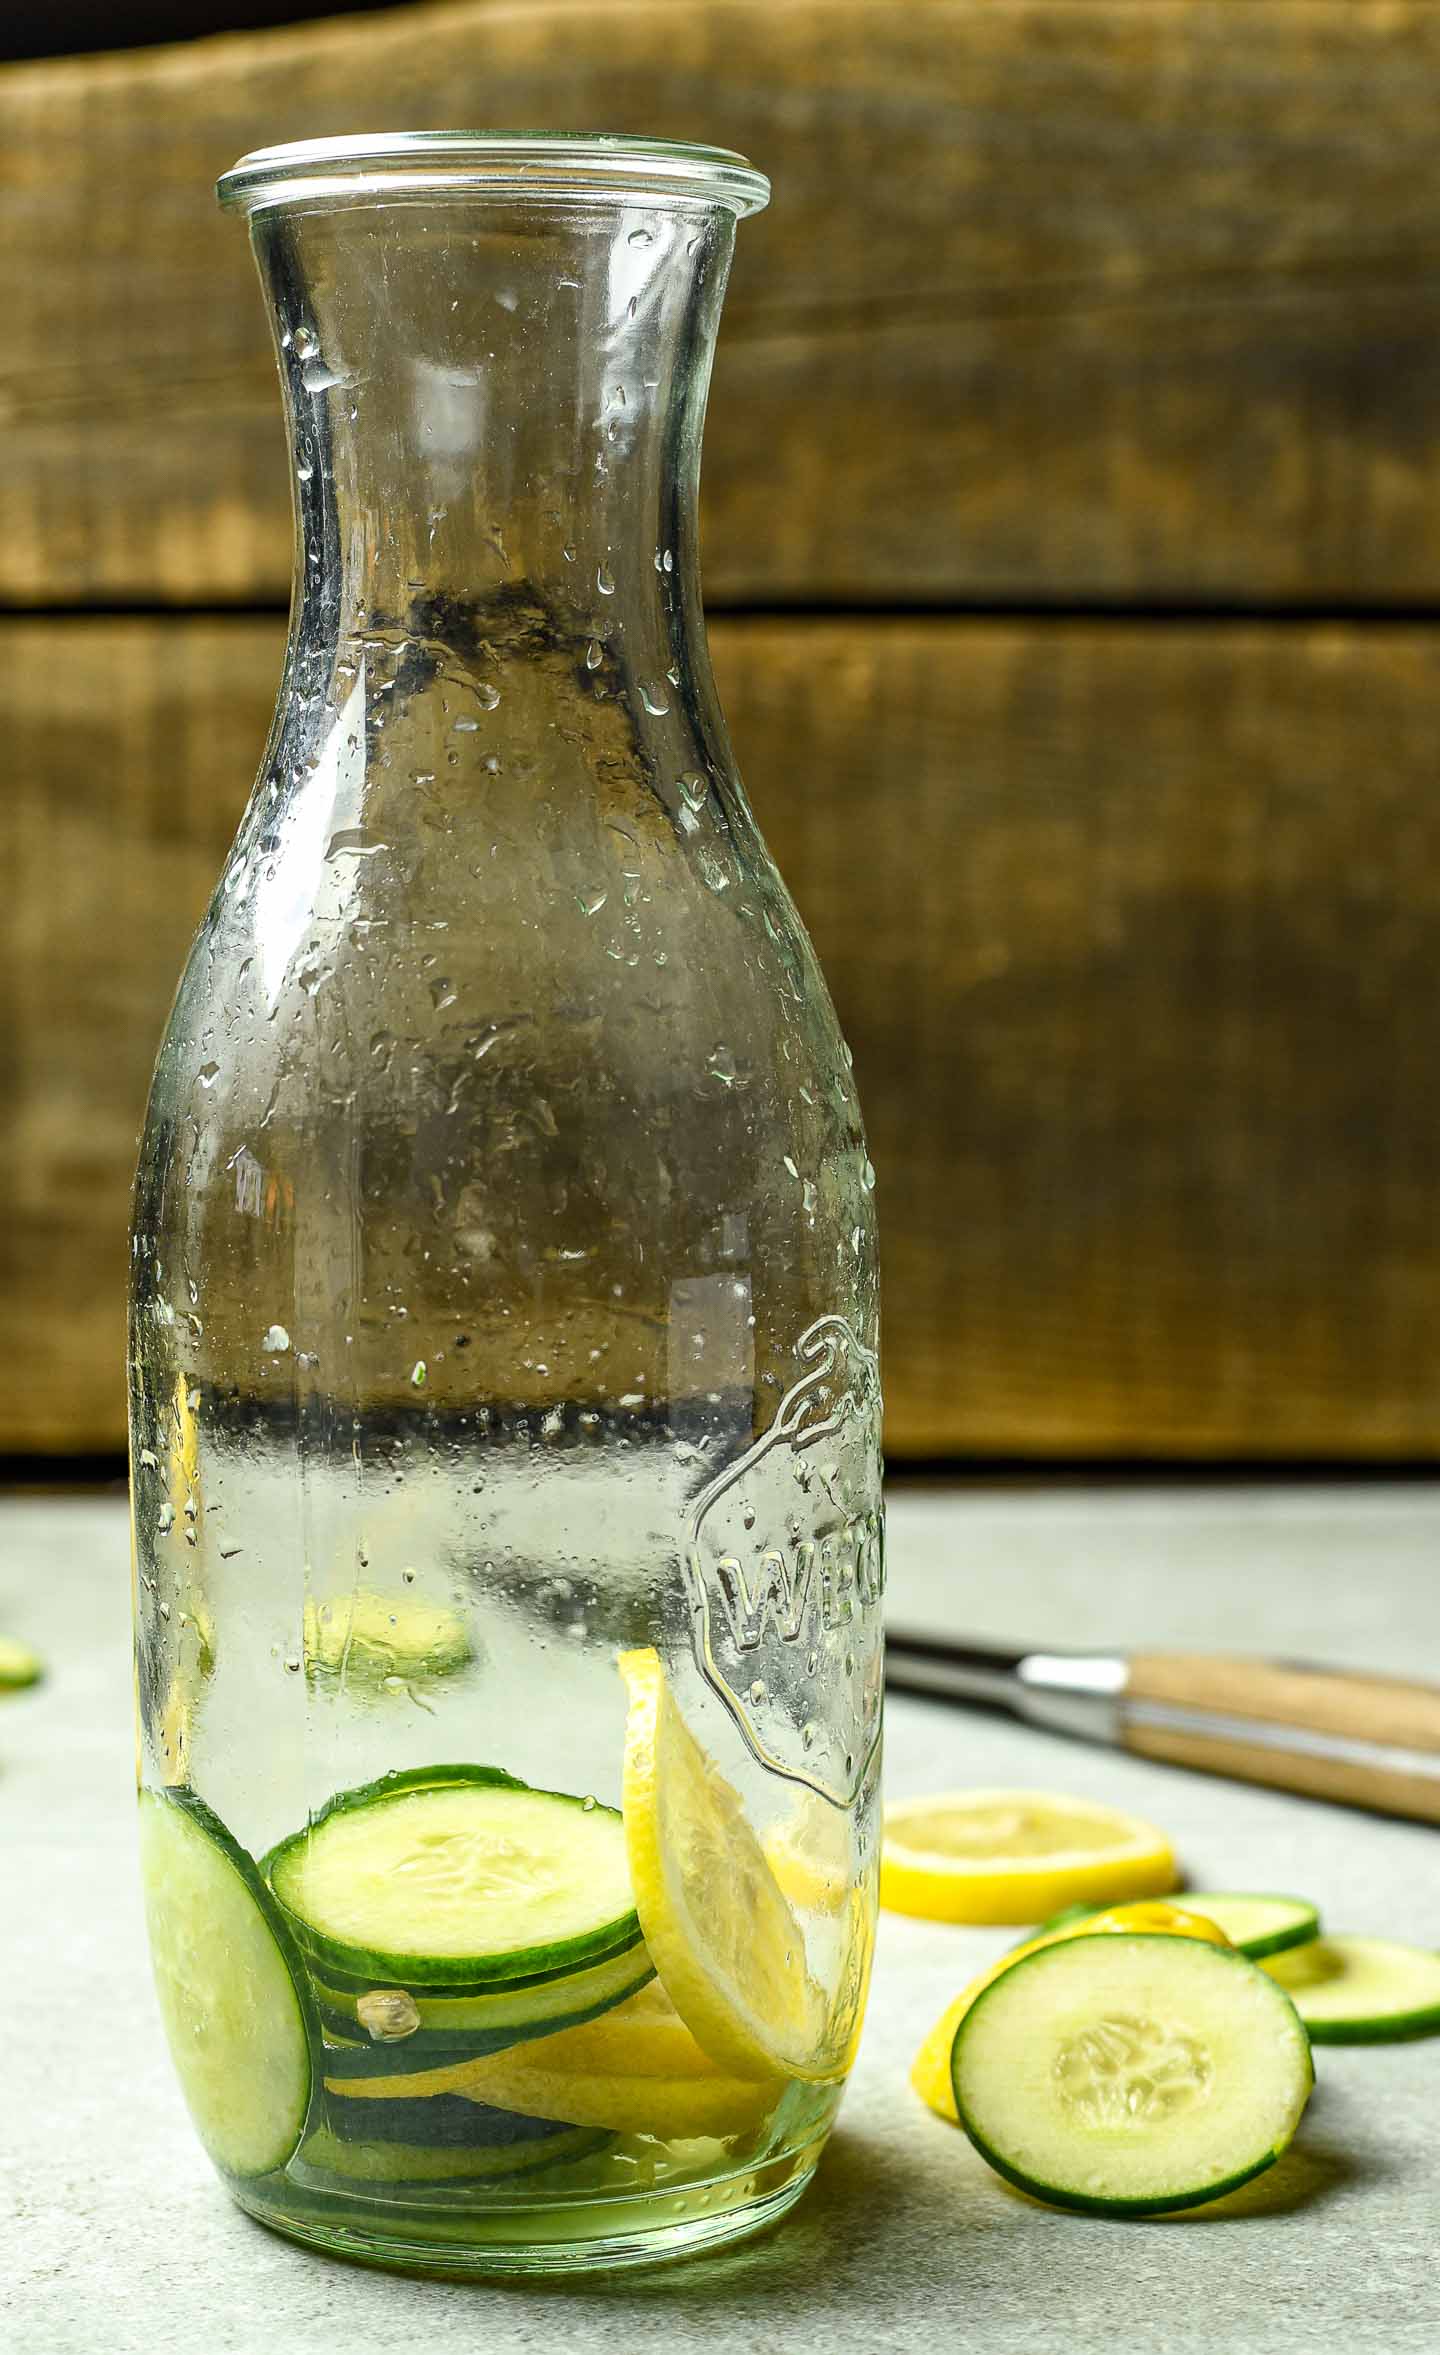 Deliciously refreshing lemon cucumber water made with only lemons, cucumbers, and water. Garnish with fresh mint or berries of your choice. Perfect day or night.